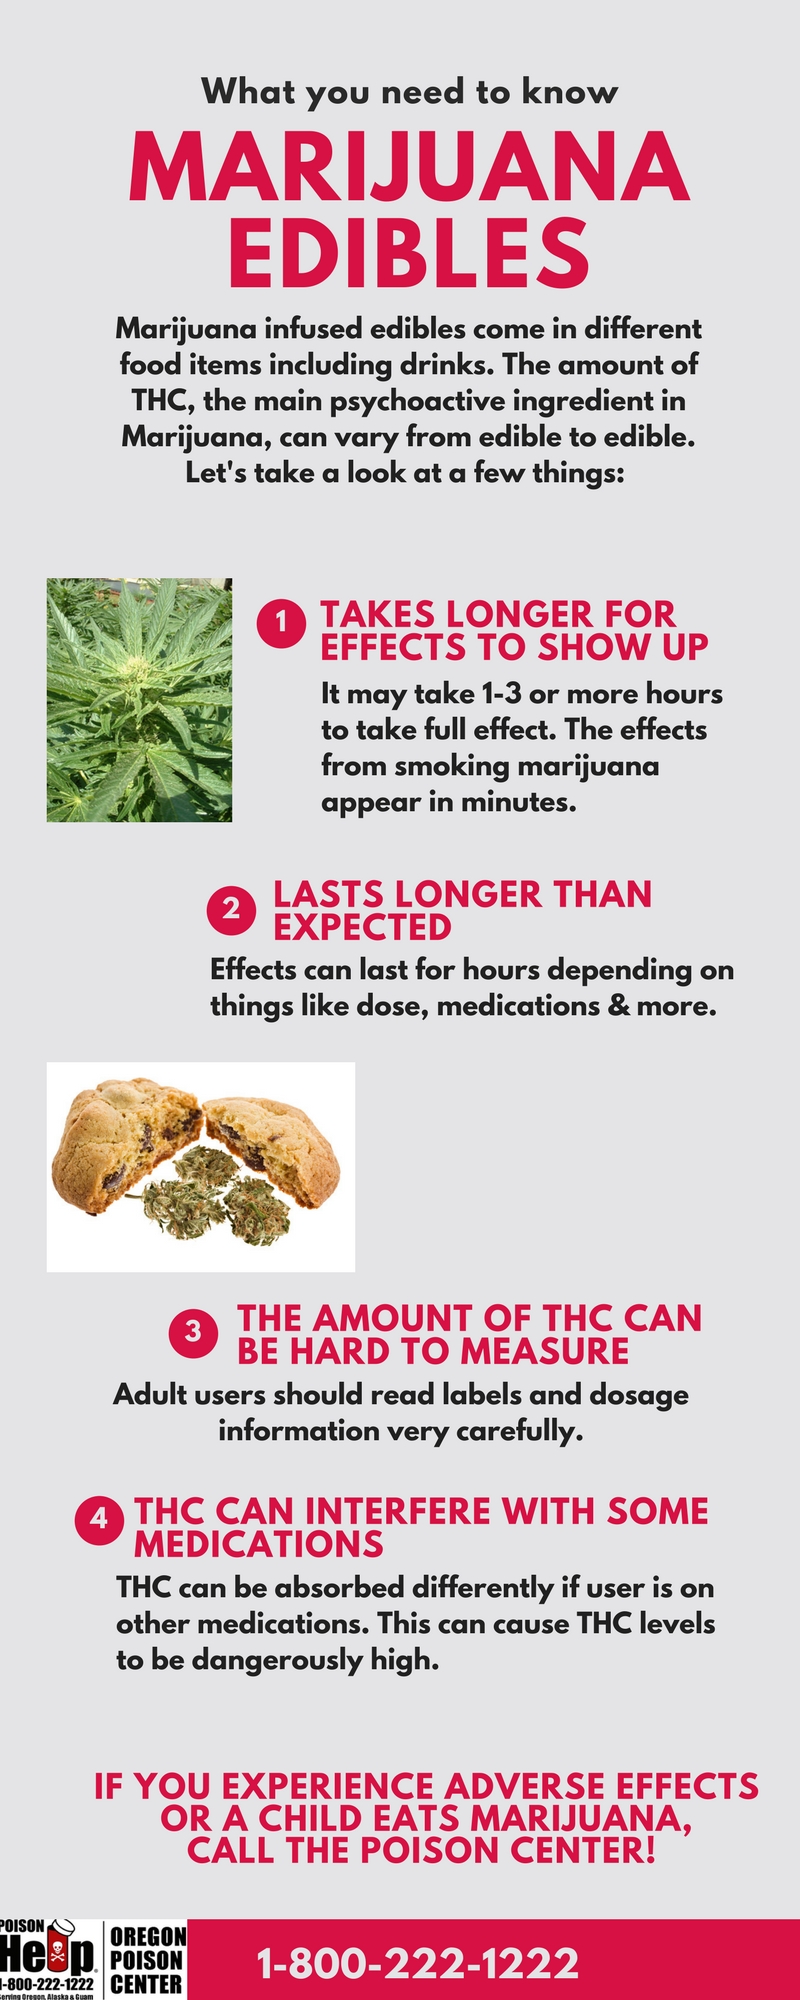 This infographic lists potential hazards of eating marijuana edibles, based on the difficulty of appropriately dosing the THC.